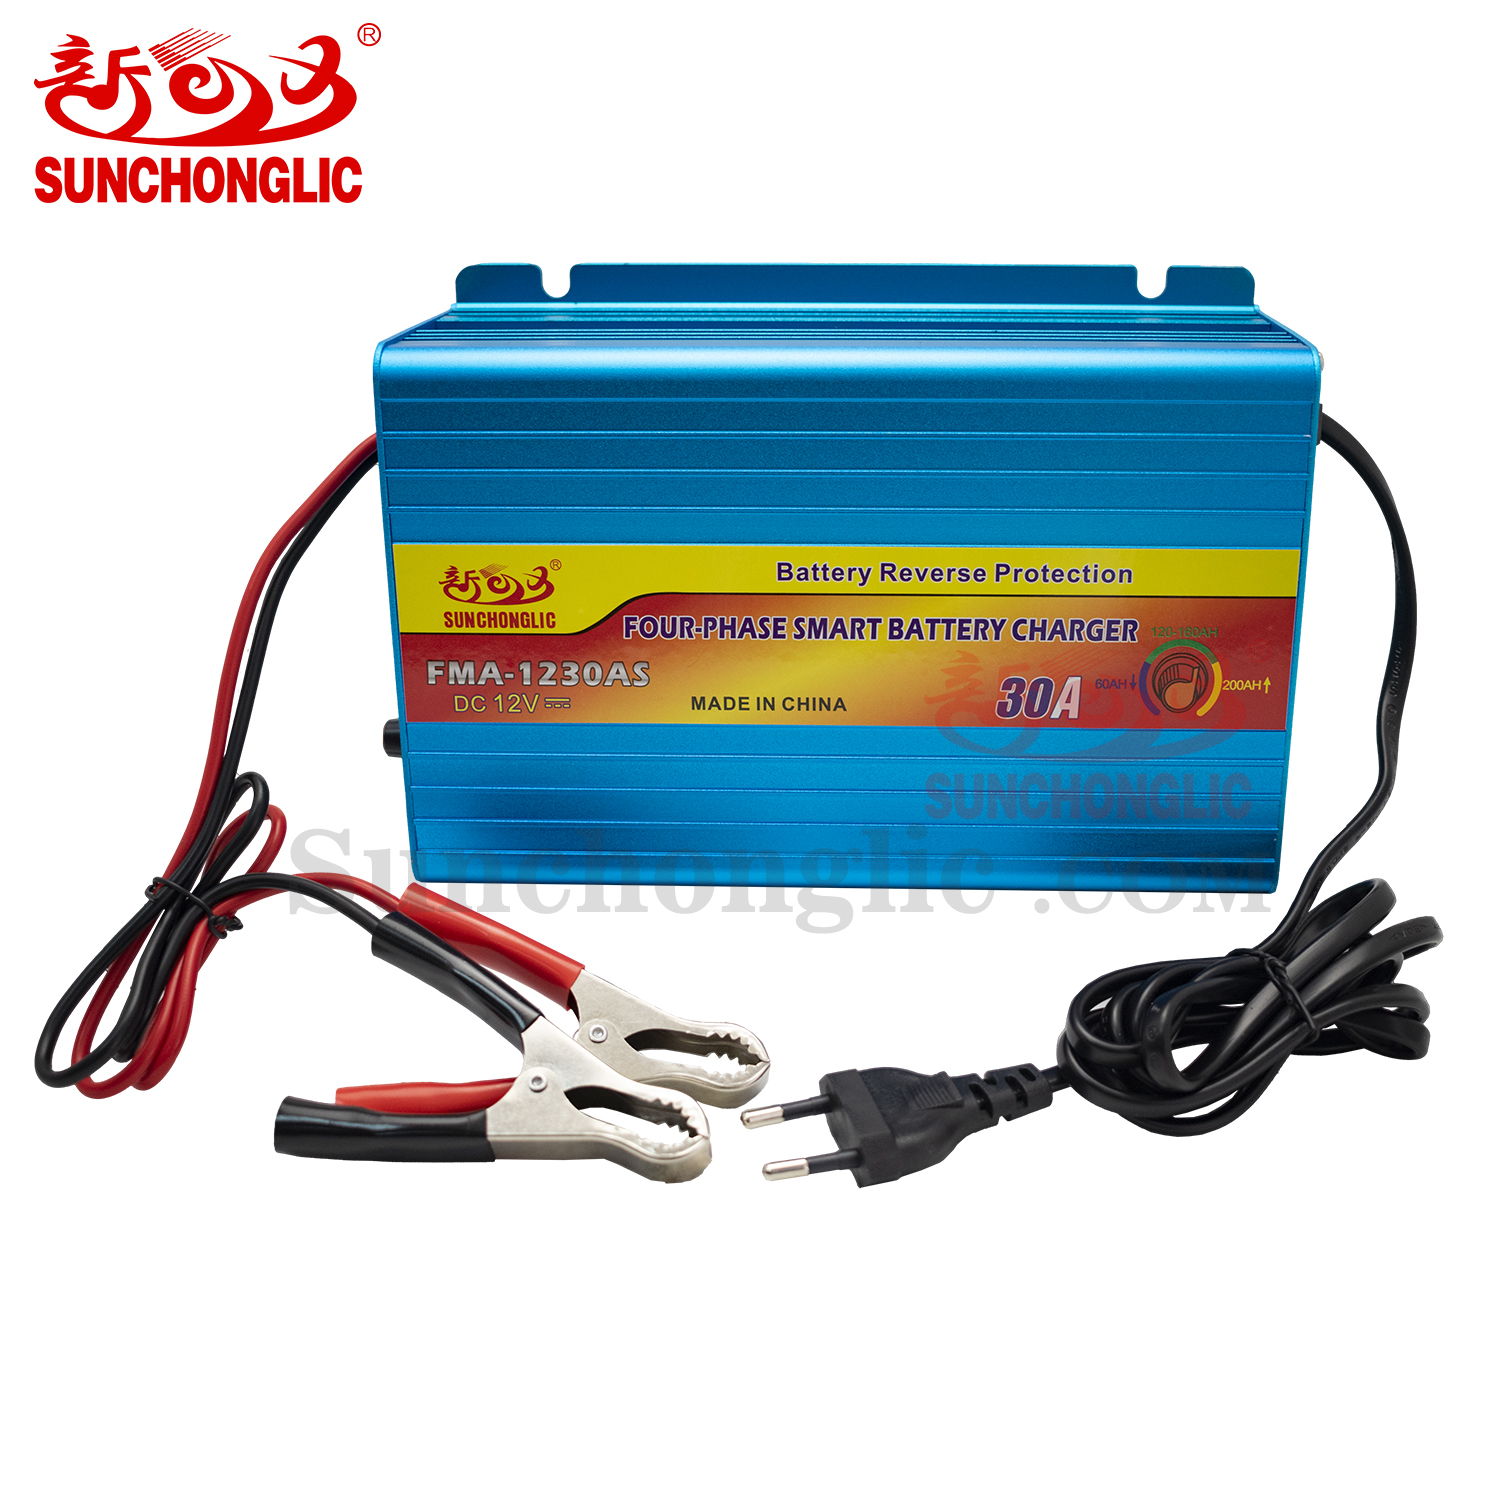 Four-phase 12V 30A agm gel lead acid battery charger